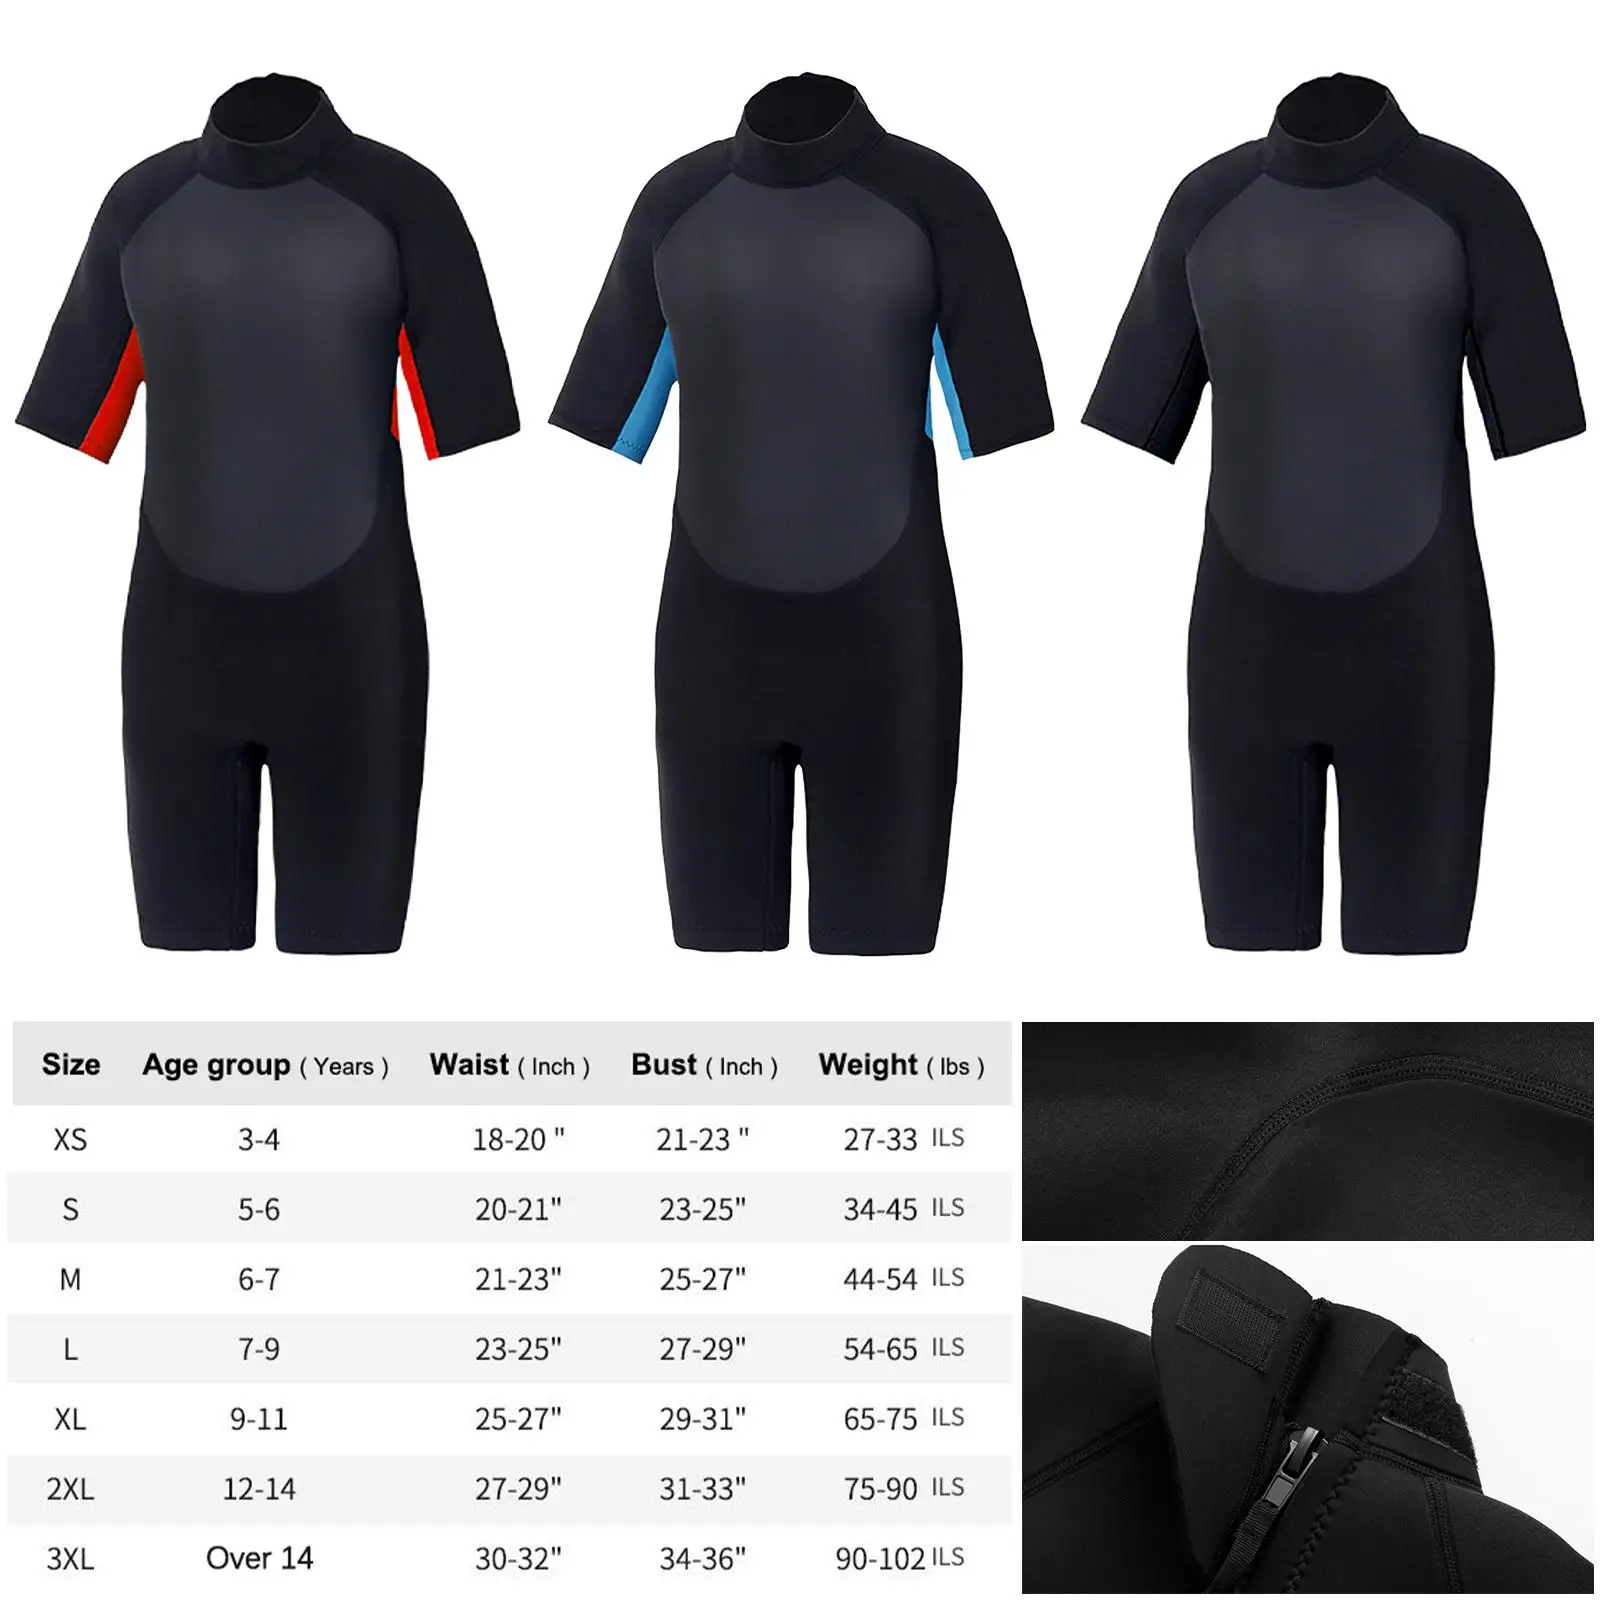 3mm Premium Neoprene Kids Shorty Wetsuit Diving Suit for Scuba Diving Youth